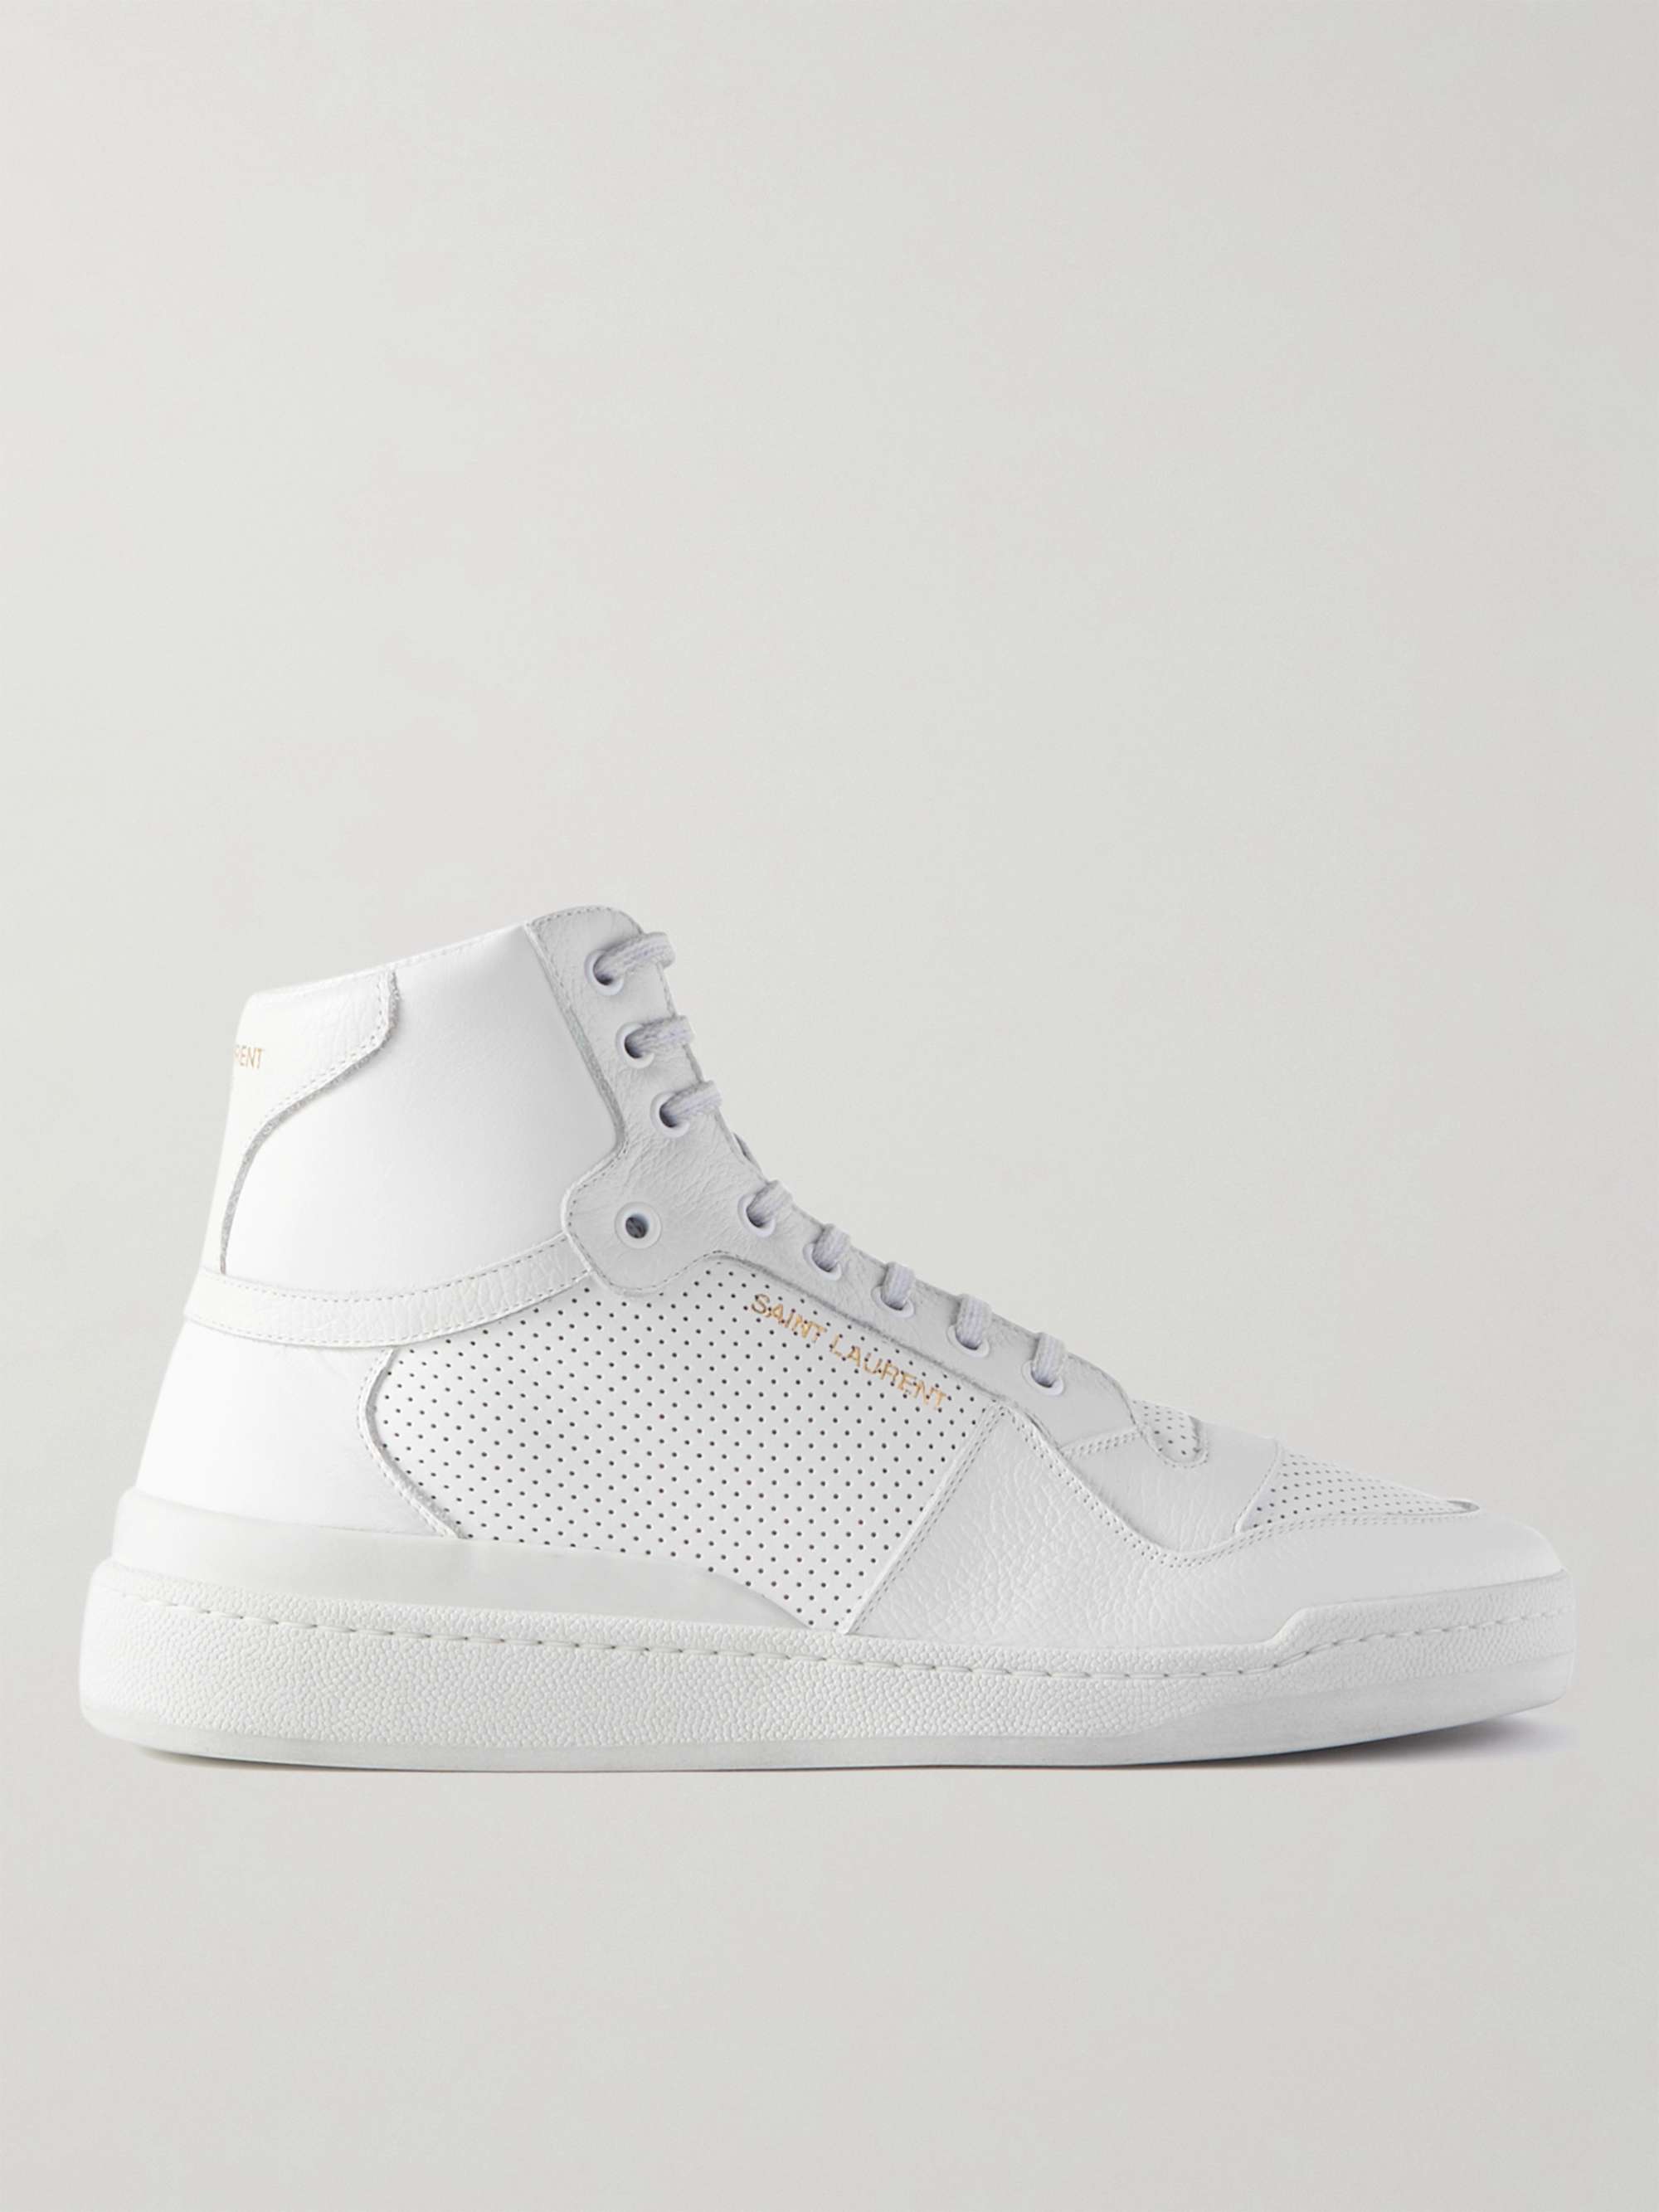 SAINT LAURENT SL/24 Perforated Leather High-Top Sneakers